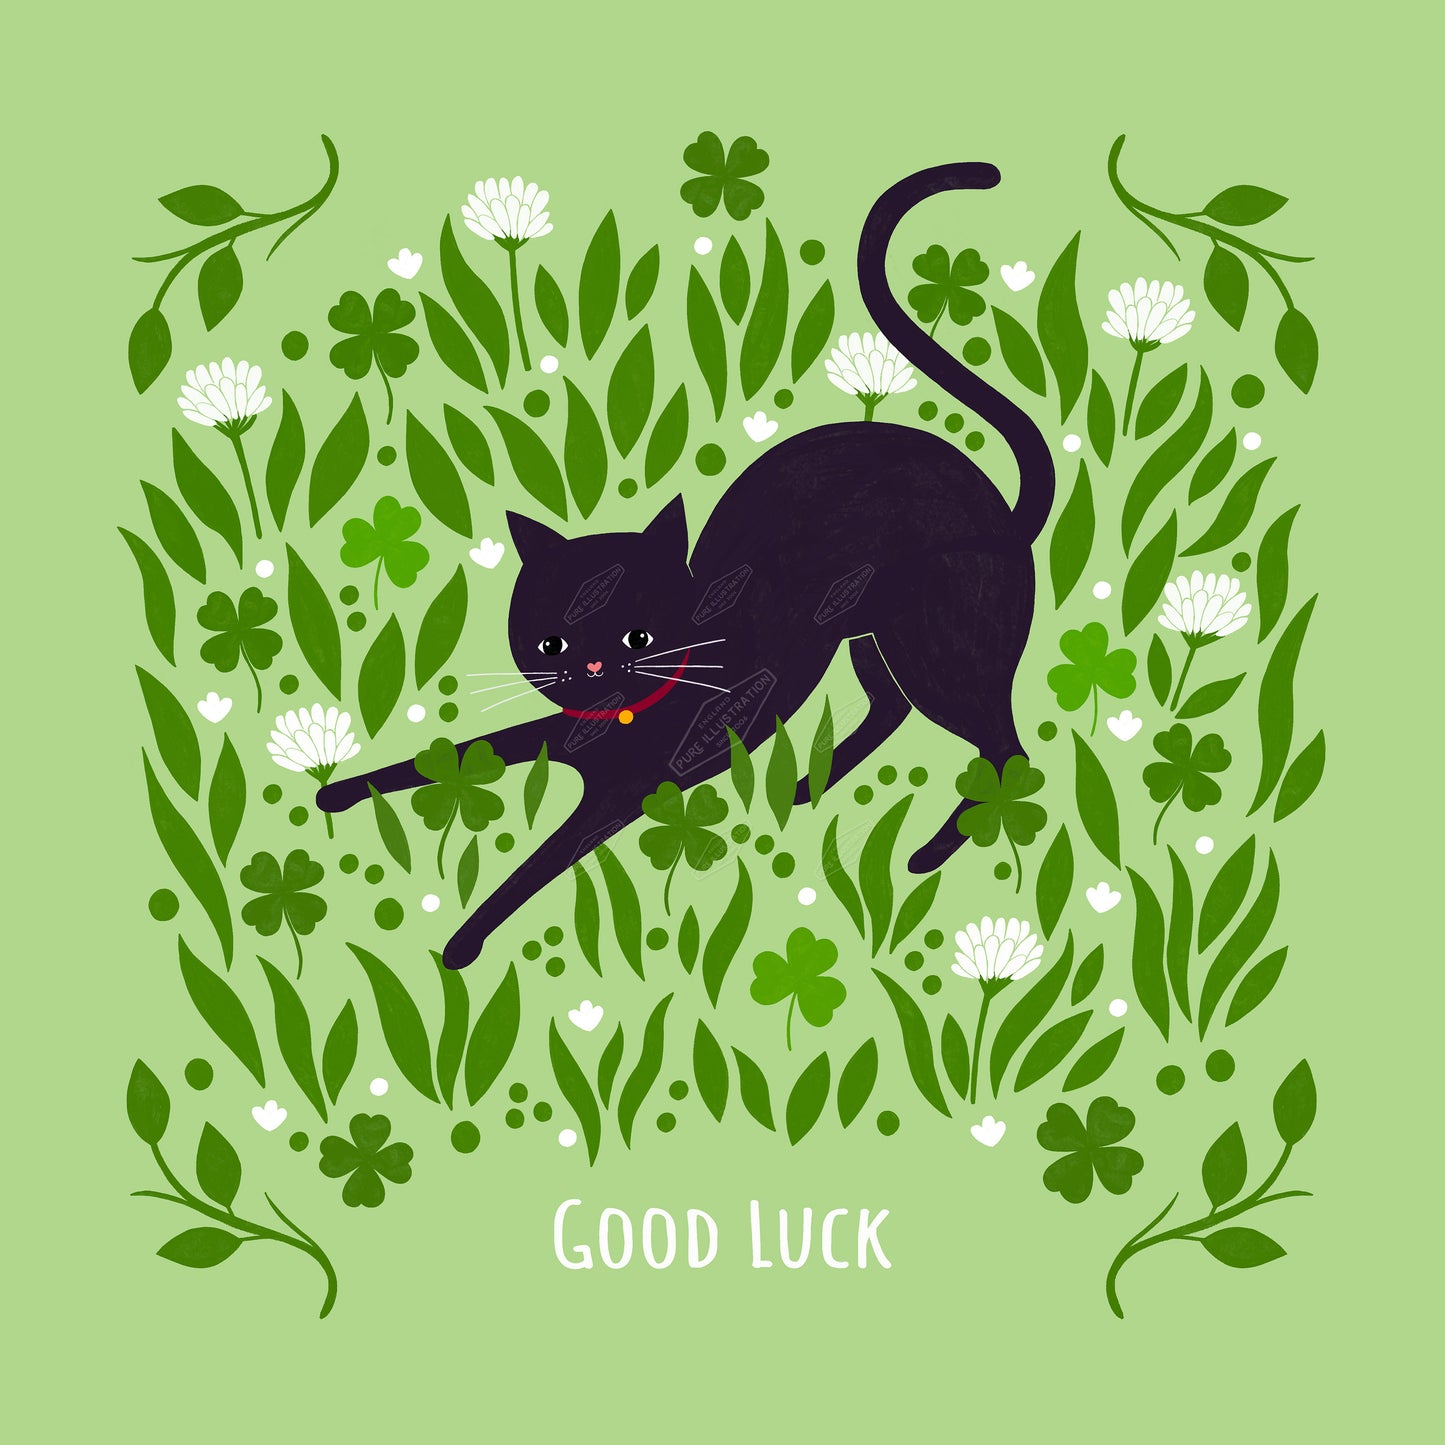 00035656SSN- Sian Summerhayes is represented by Pure Art Licensing Agency - Good Luck Greeting Card Design